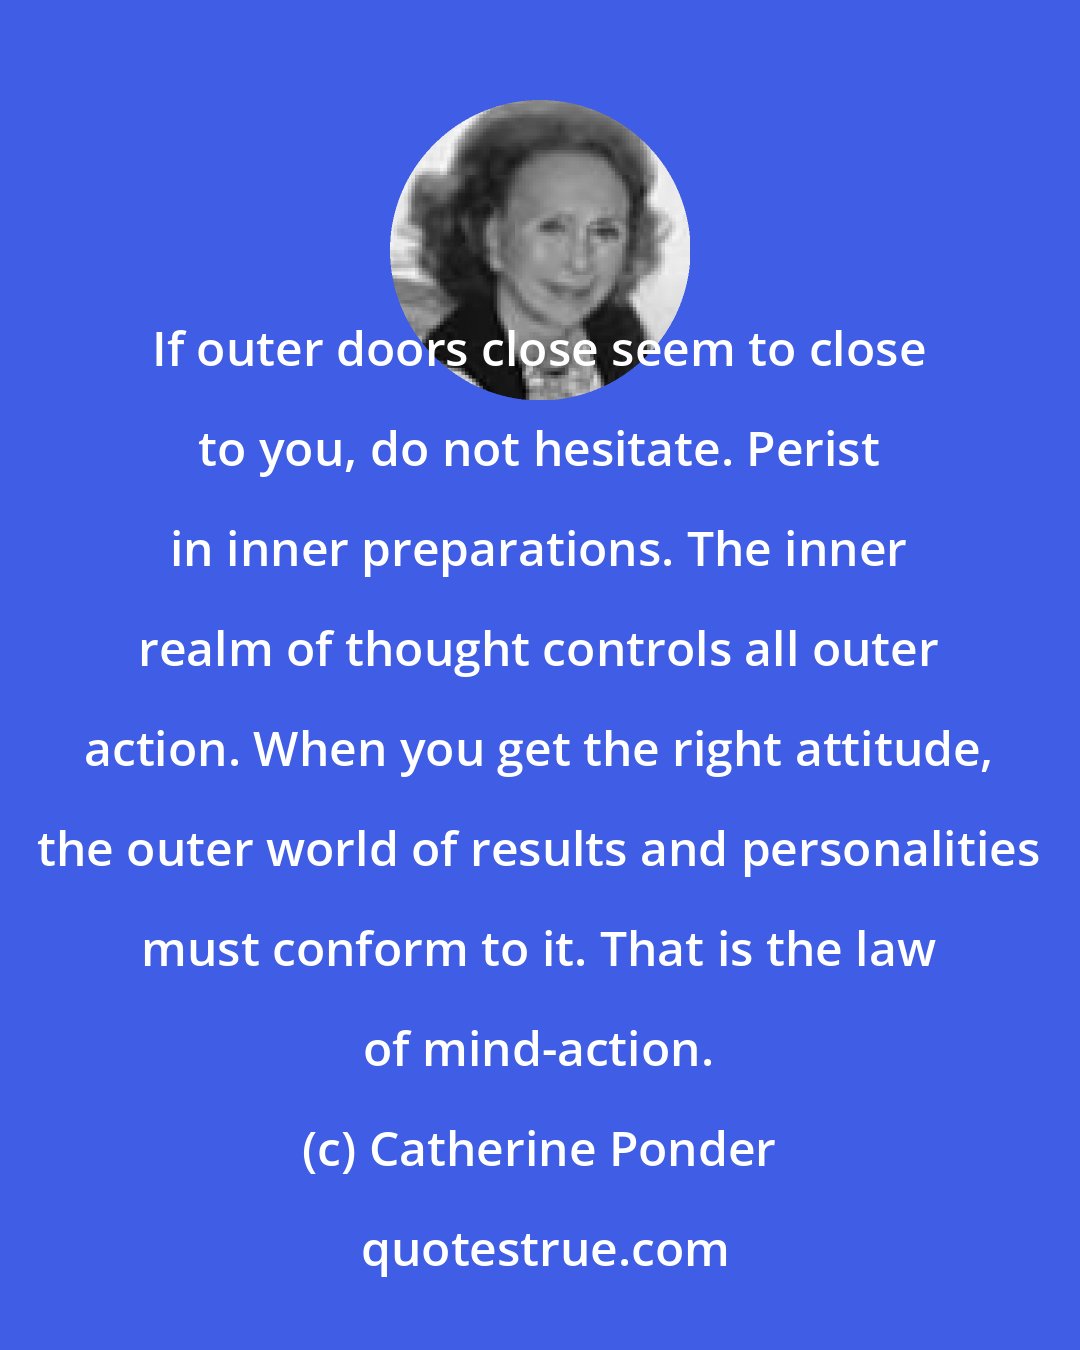 Catherine Ponder: If outer doors close seem to close to you, do not hesitate. Perist in inner preparations. The inner realm of thought controls all outer action. When you get the right attitude, the outer world of results and personalities must conform to it. That is the law of mind-action.